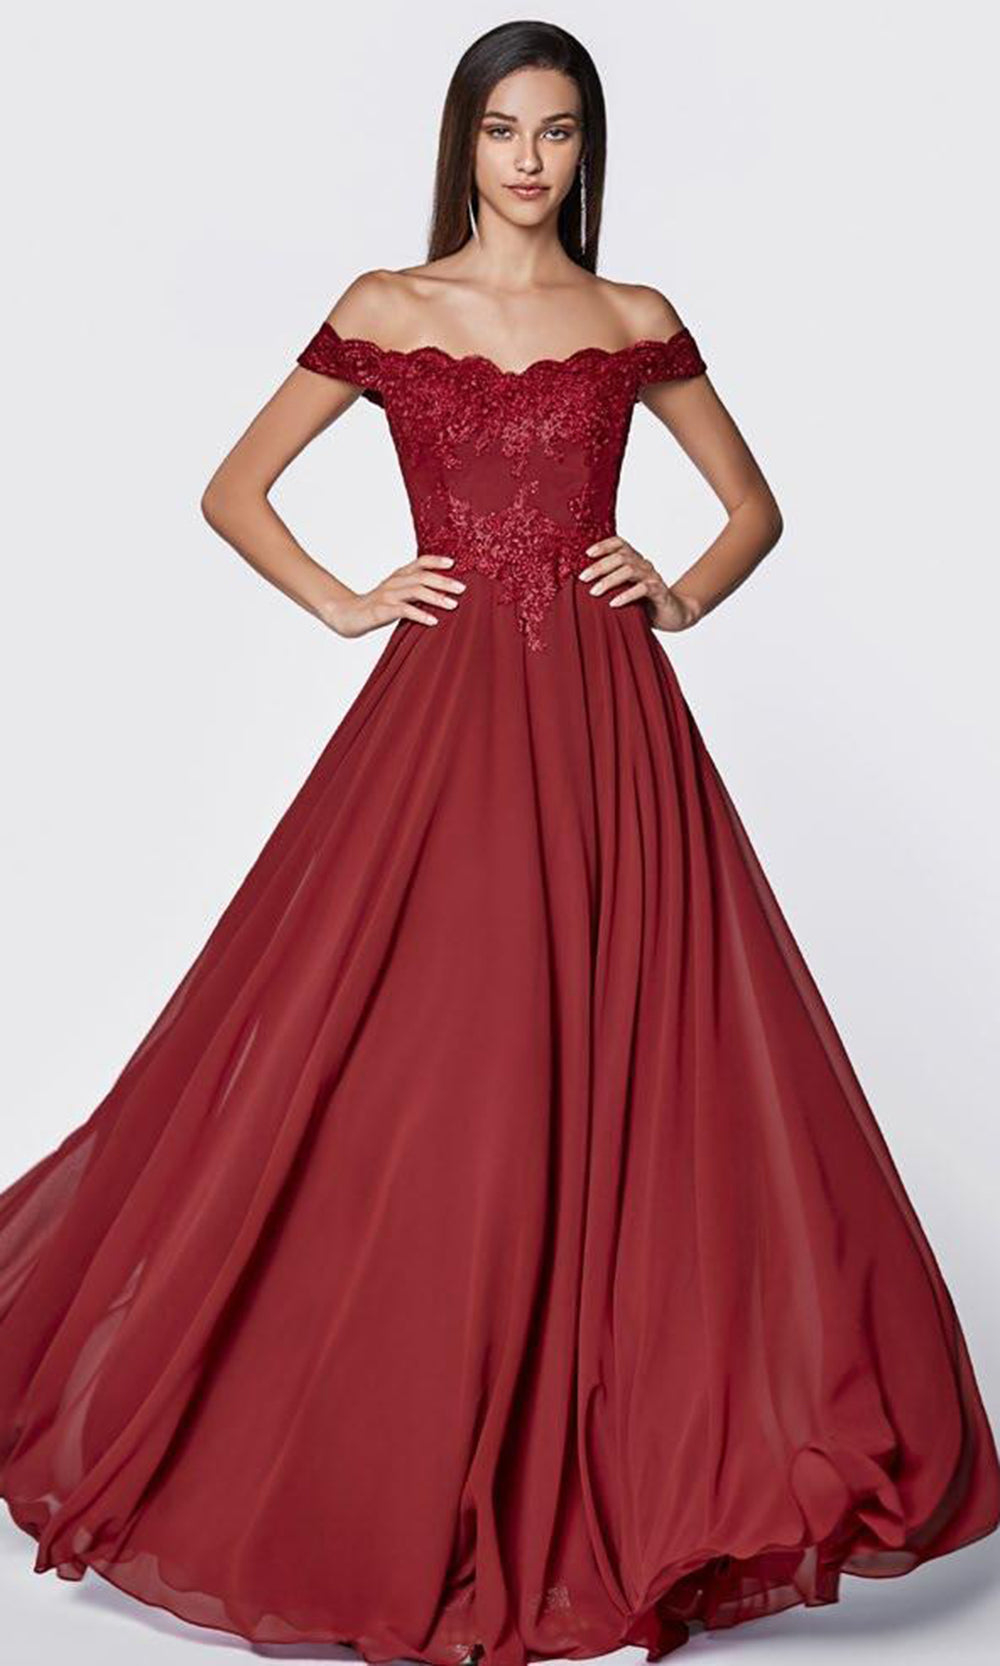 Ladivine - 7258 Scallop Chiffon A-Line Gown In Red